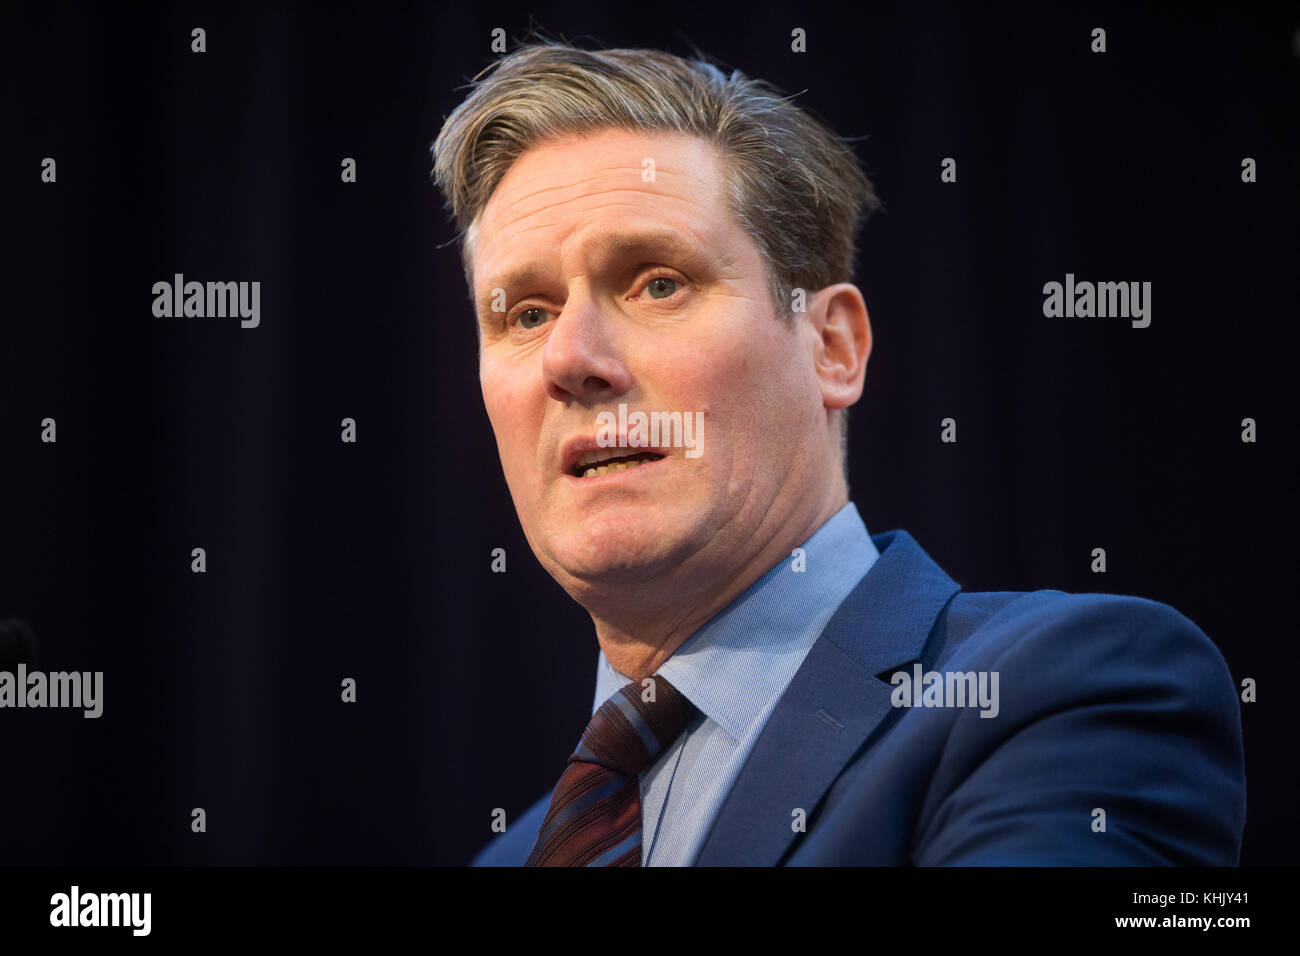 Shadow Minister for Exiting the European Union, Keir Starmer gives a speech about Brexit. Stock Photo